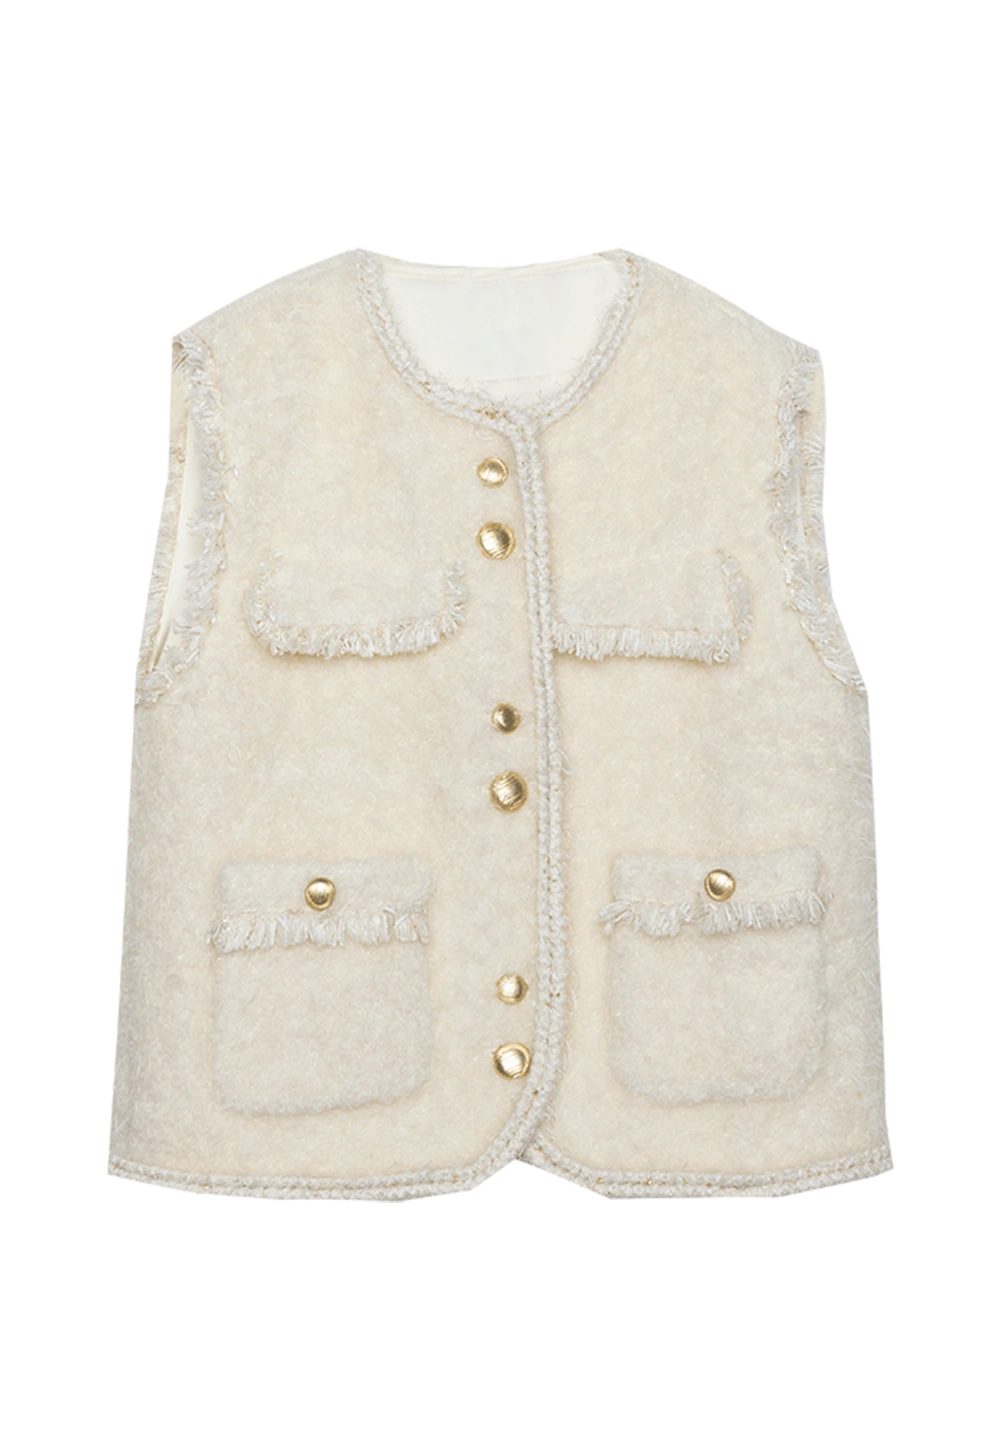 Women's Wool Blend Sleeveless Vest with Fringed Pockets and Gold Button Details